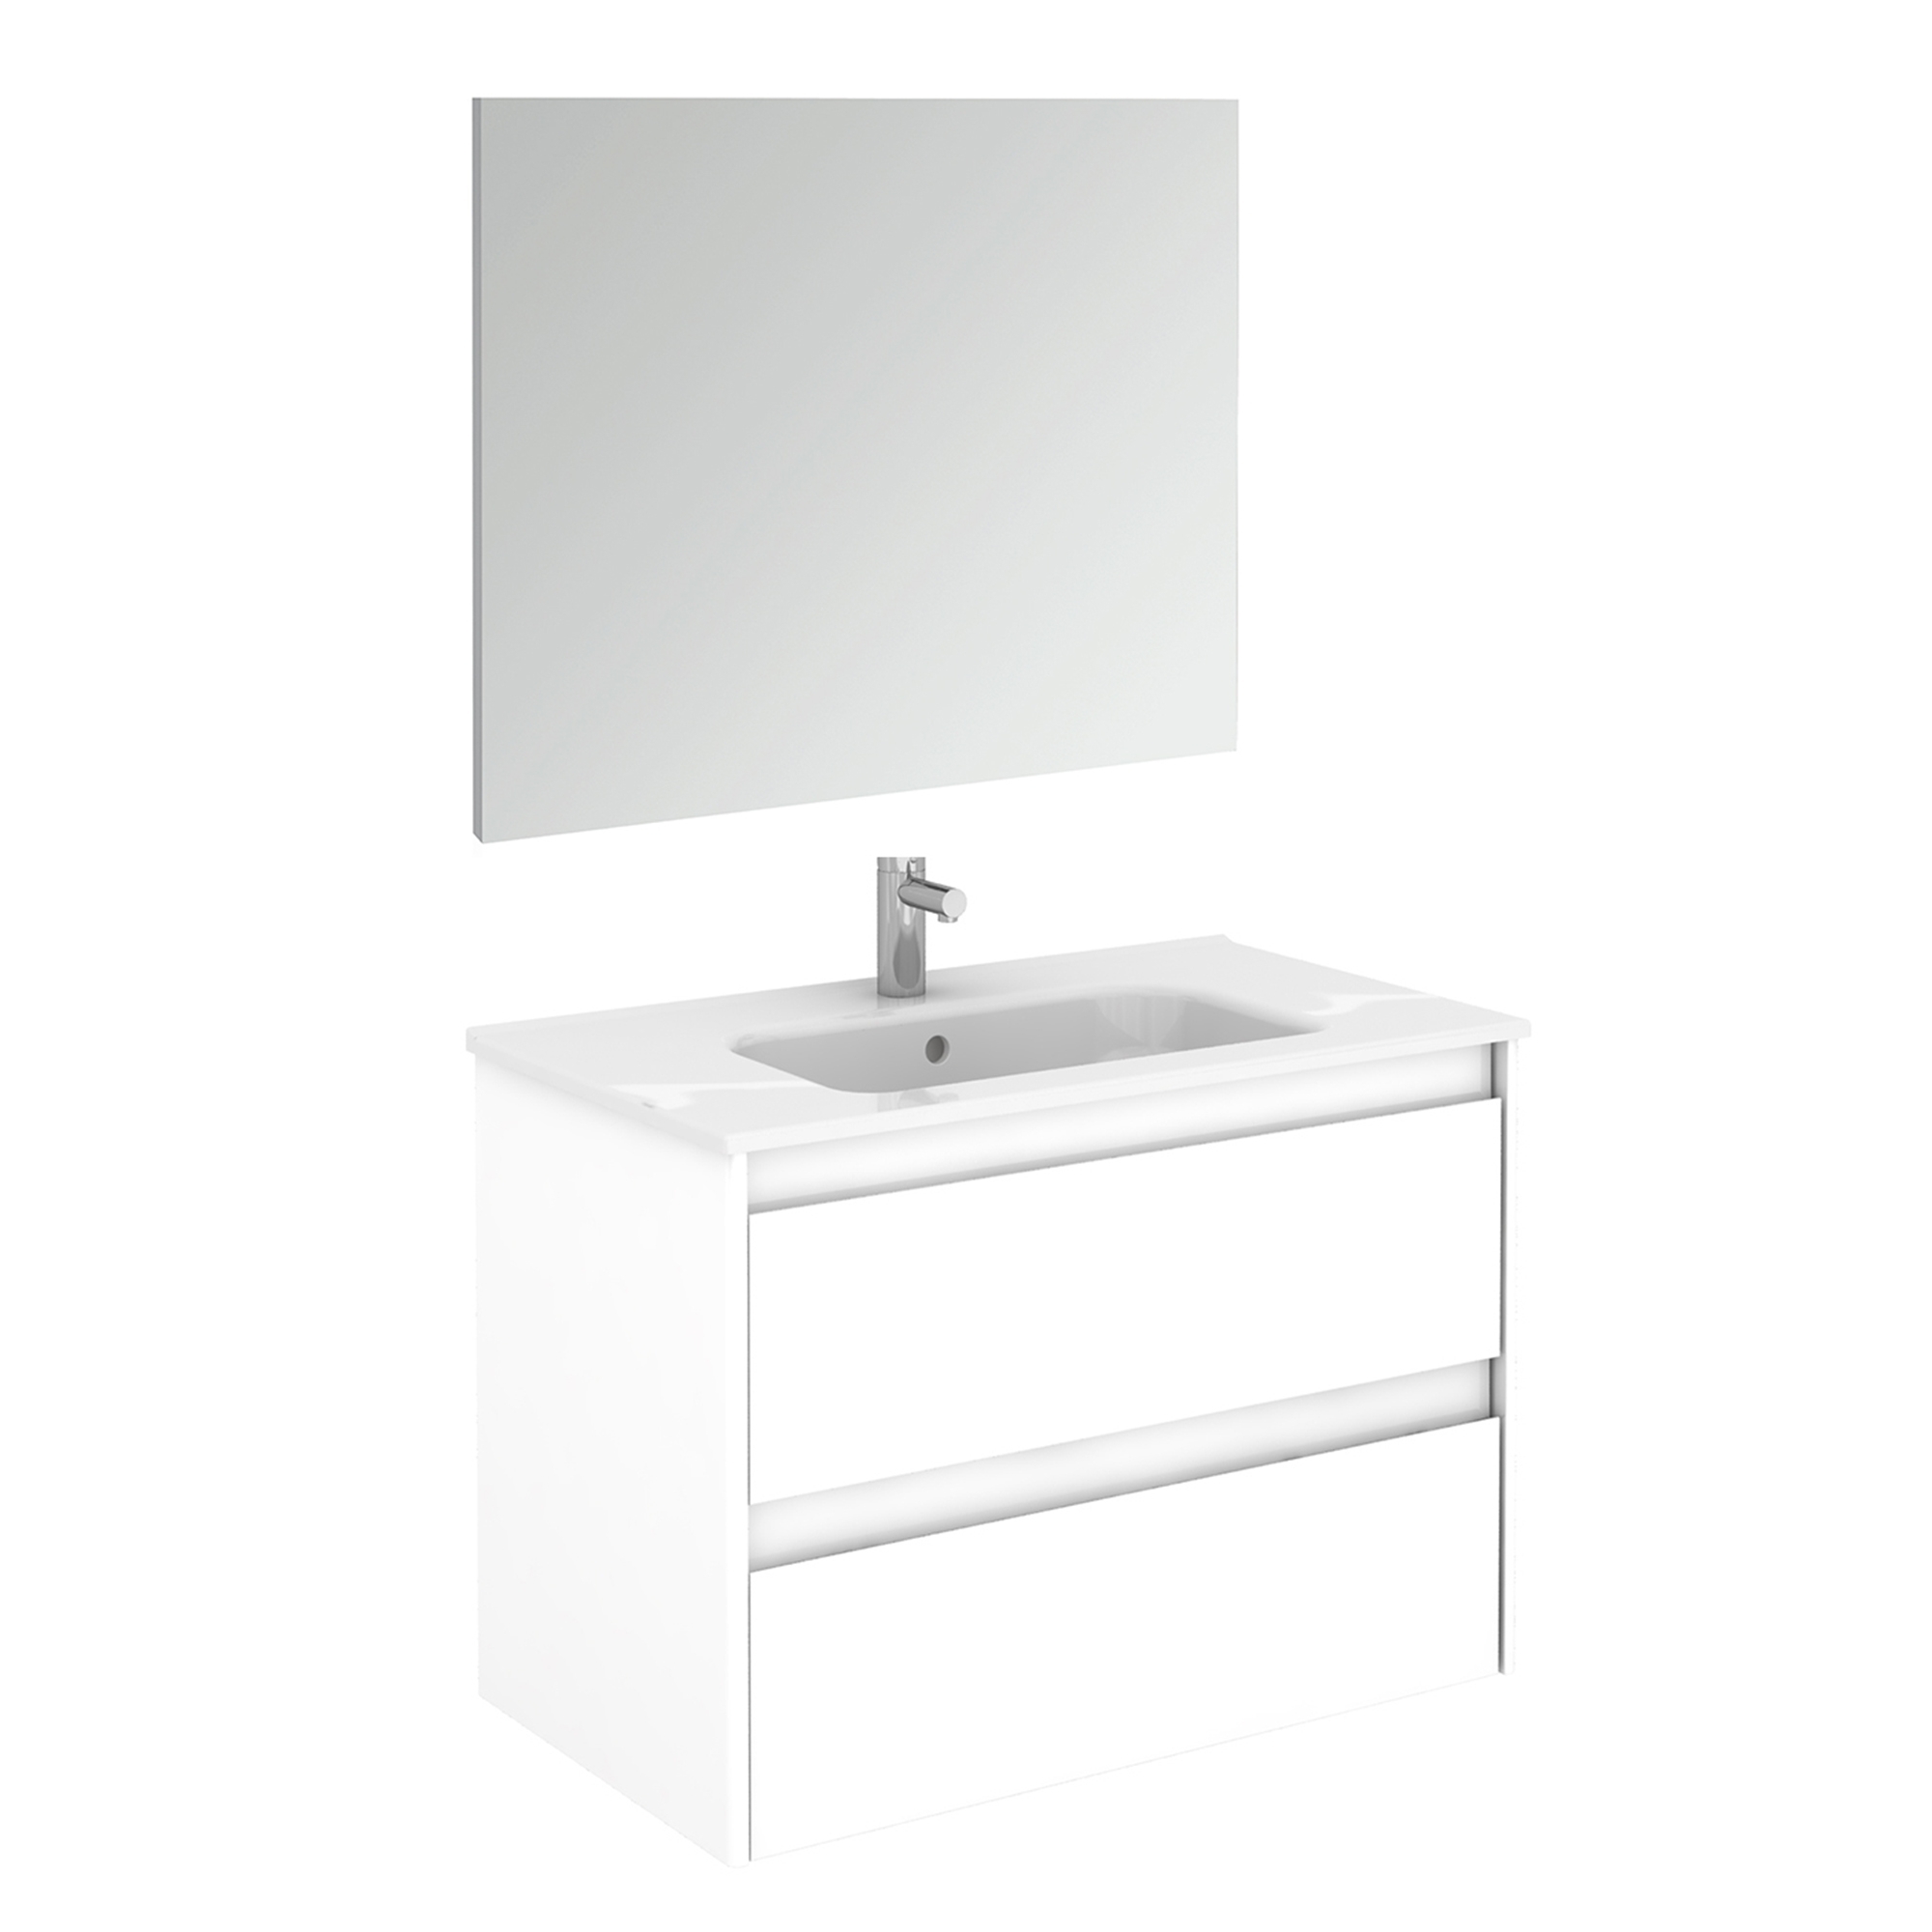 Ambra 80F Pack 1 Gloss White Complete Vanity Unit with Mirror